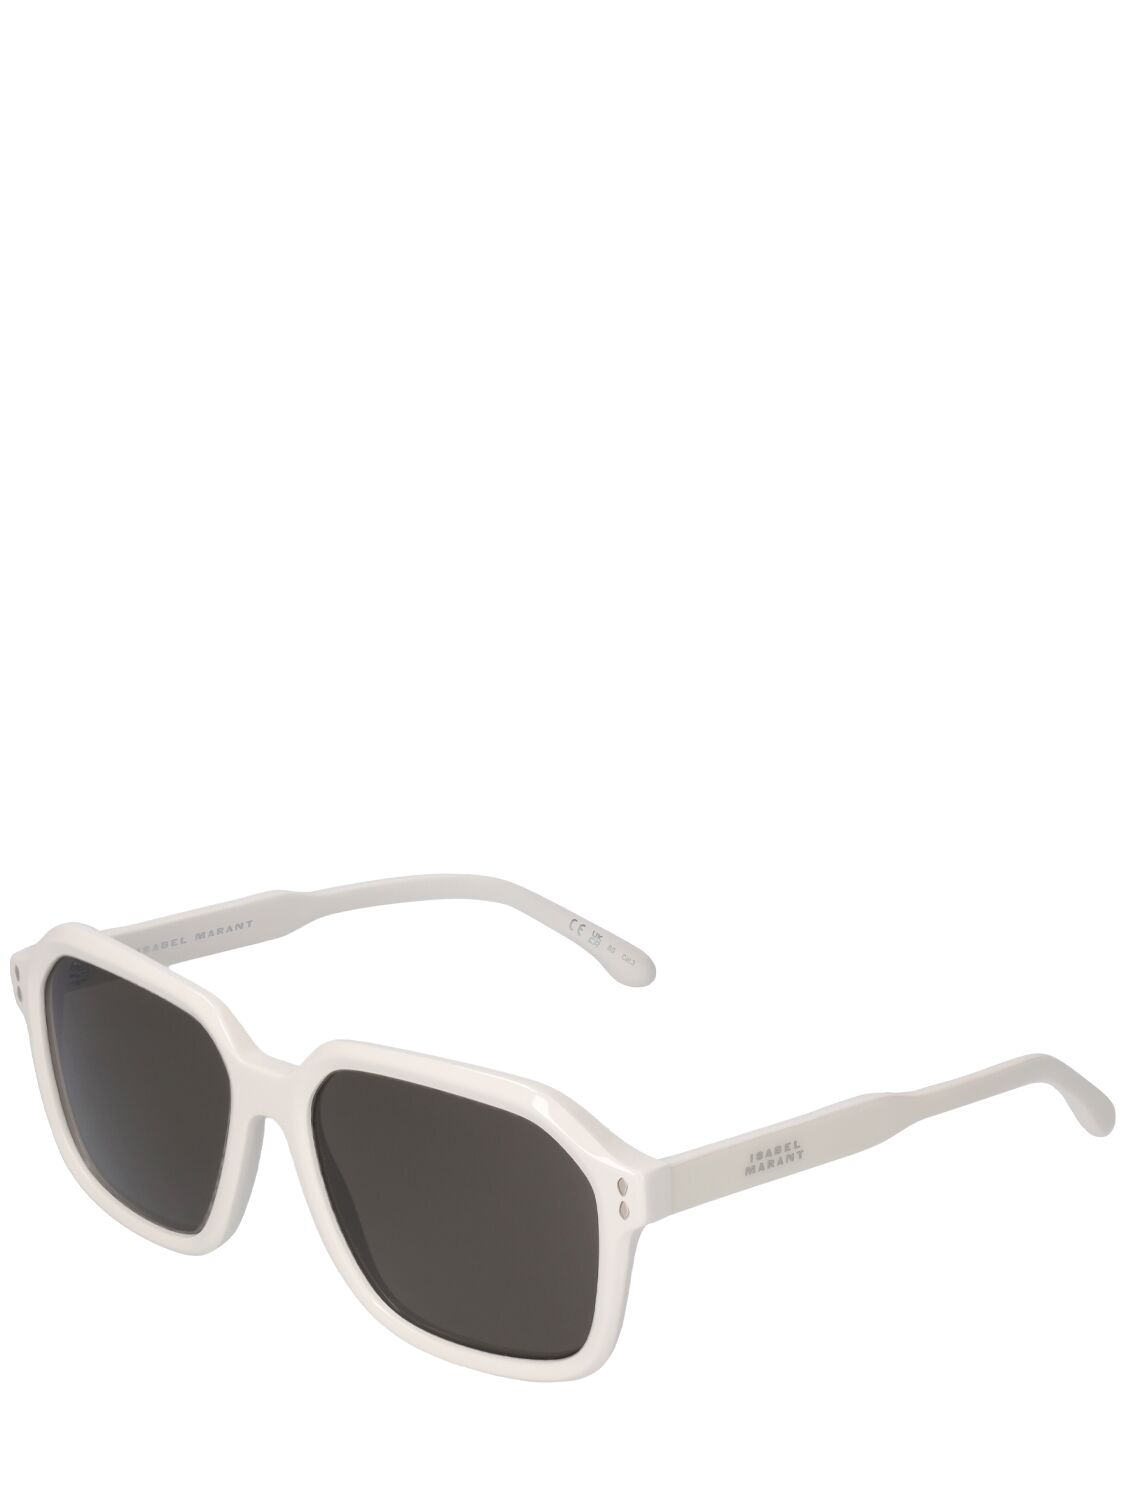 Shop Isabel Marant The In Love Classic Acetate Sunglasses In White,grey